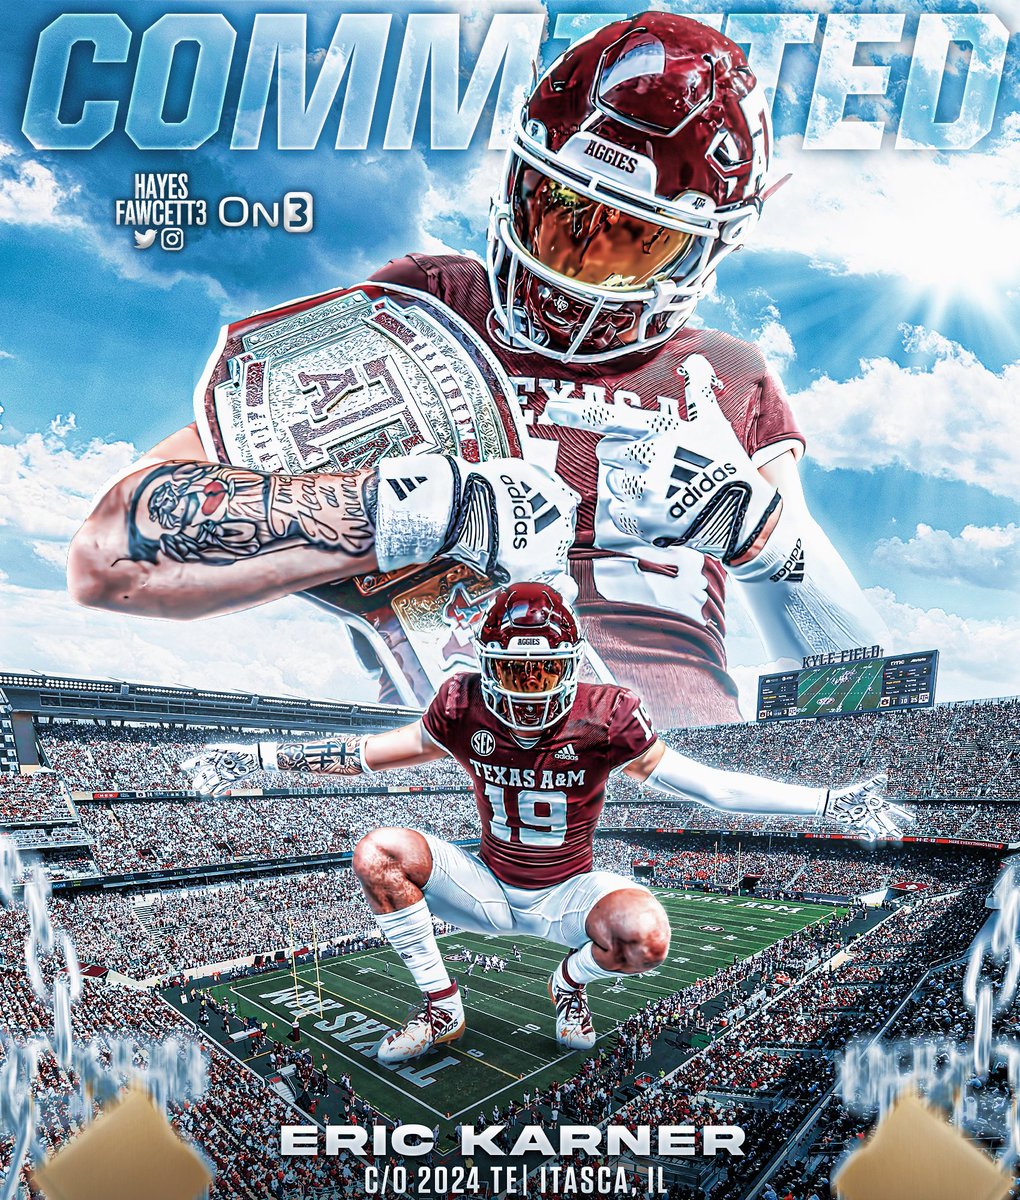 BREAKING: Four-Star TE Eric Karner tells me he has Committed to Texas A&M! The 6’5 225 TE from Itasca, IL chose the Aggies over Florida & Alabama “I’m coming home #GigEm” on3.com/college/texas-…